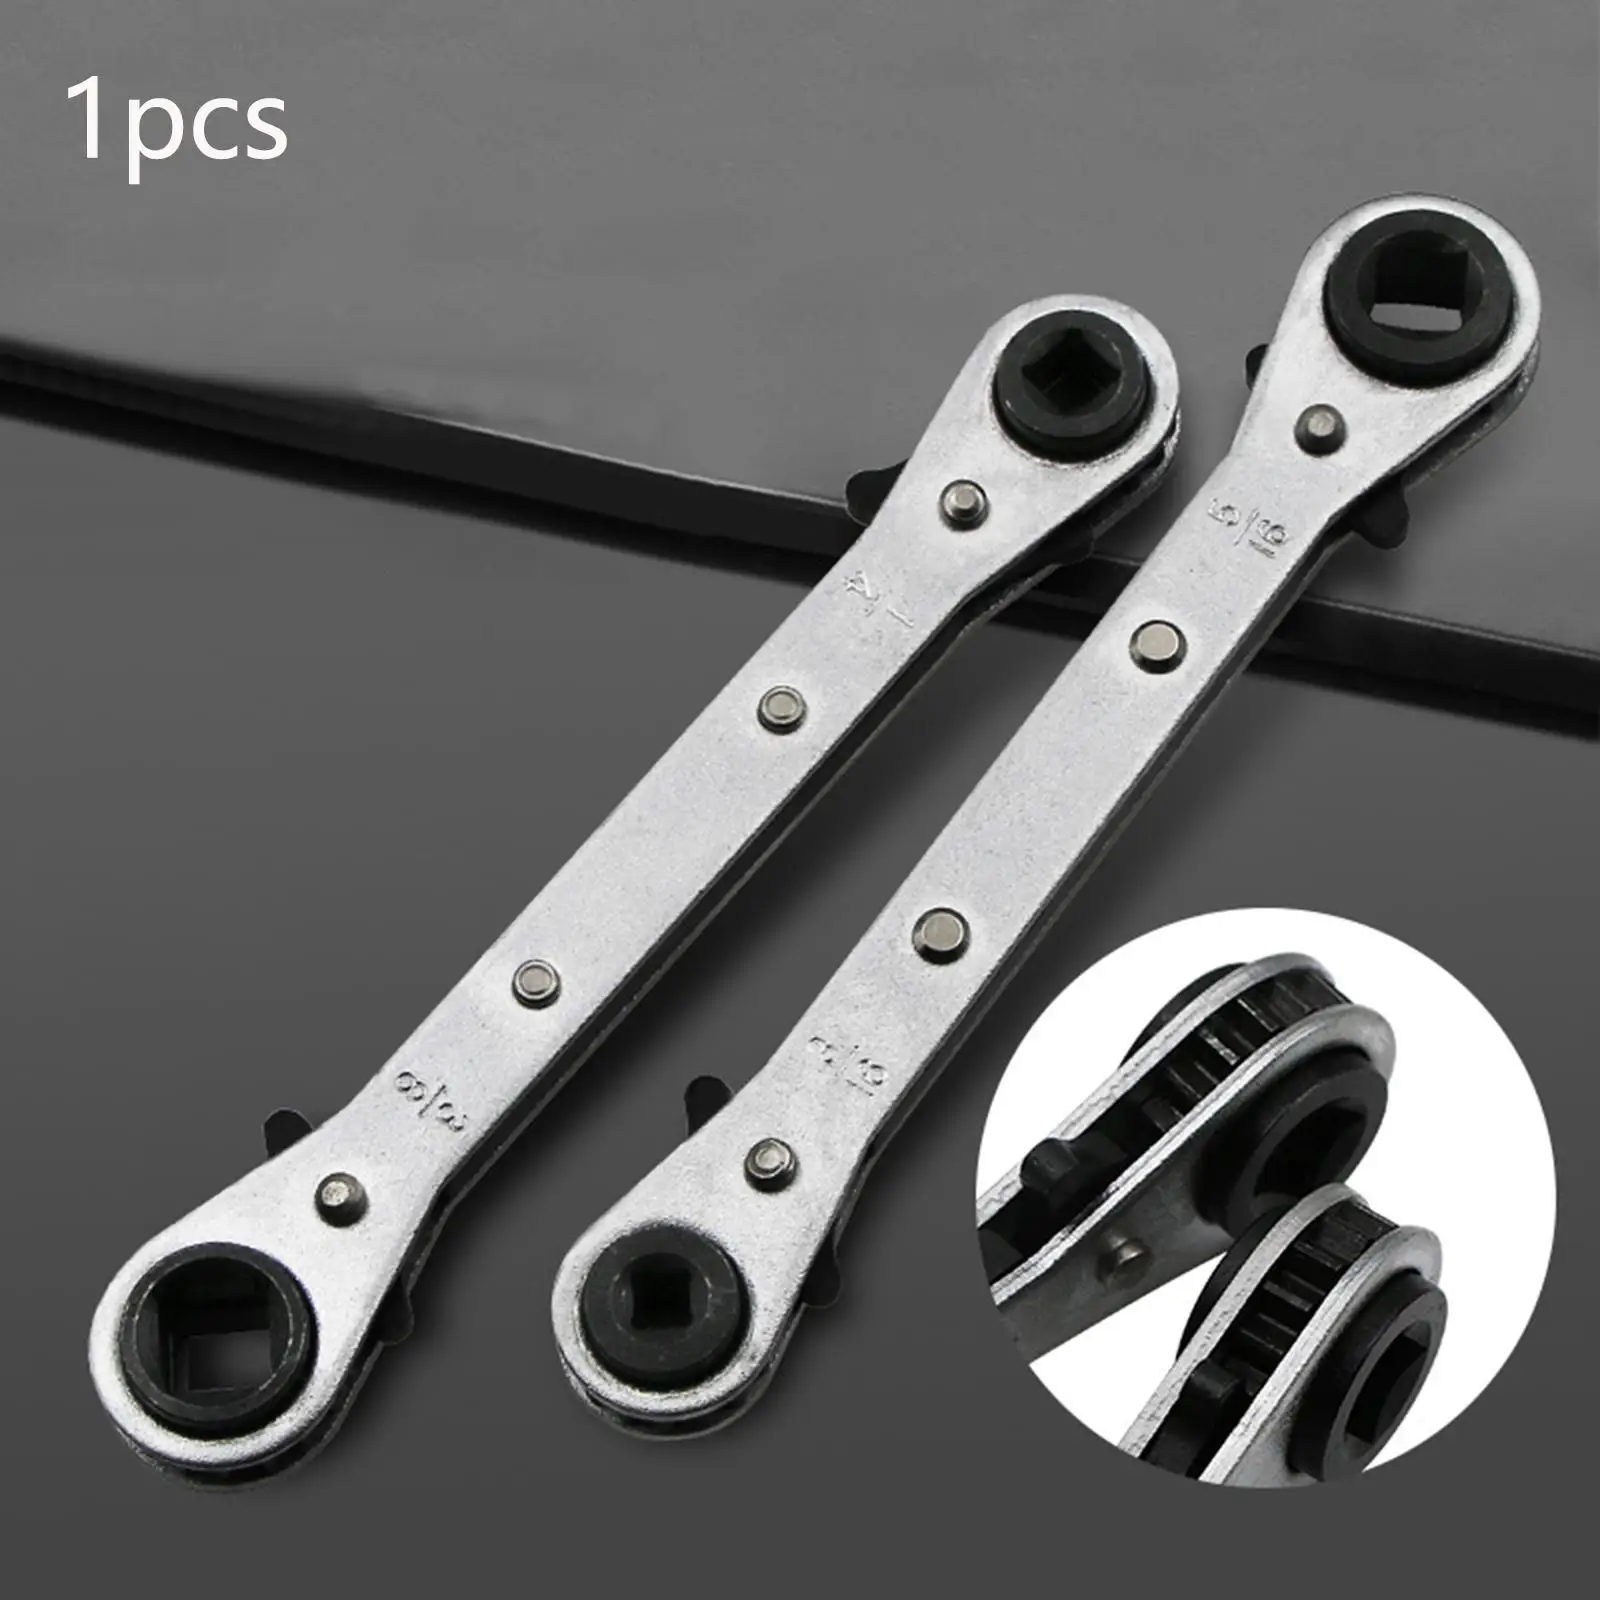 Double Head Ratchet Wrench Adjustable 4 Different Sizes Multi Function for Conditioning Repair